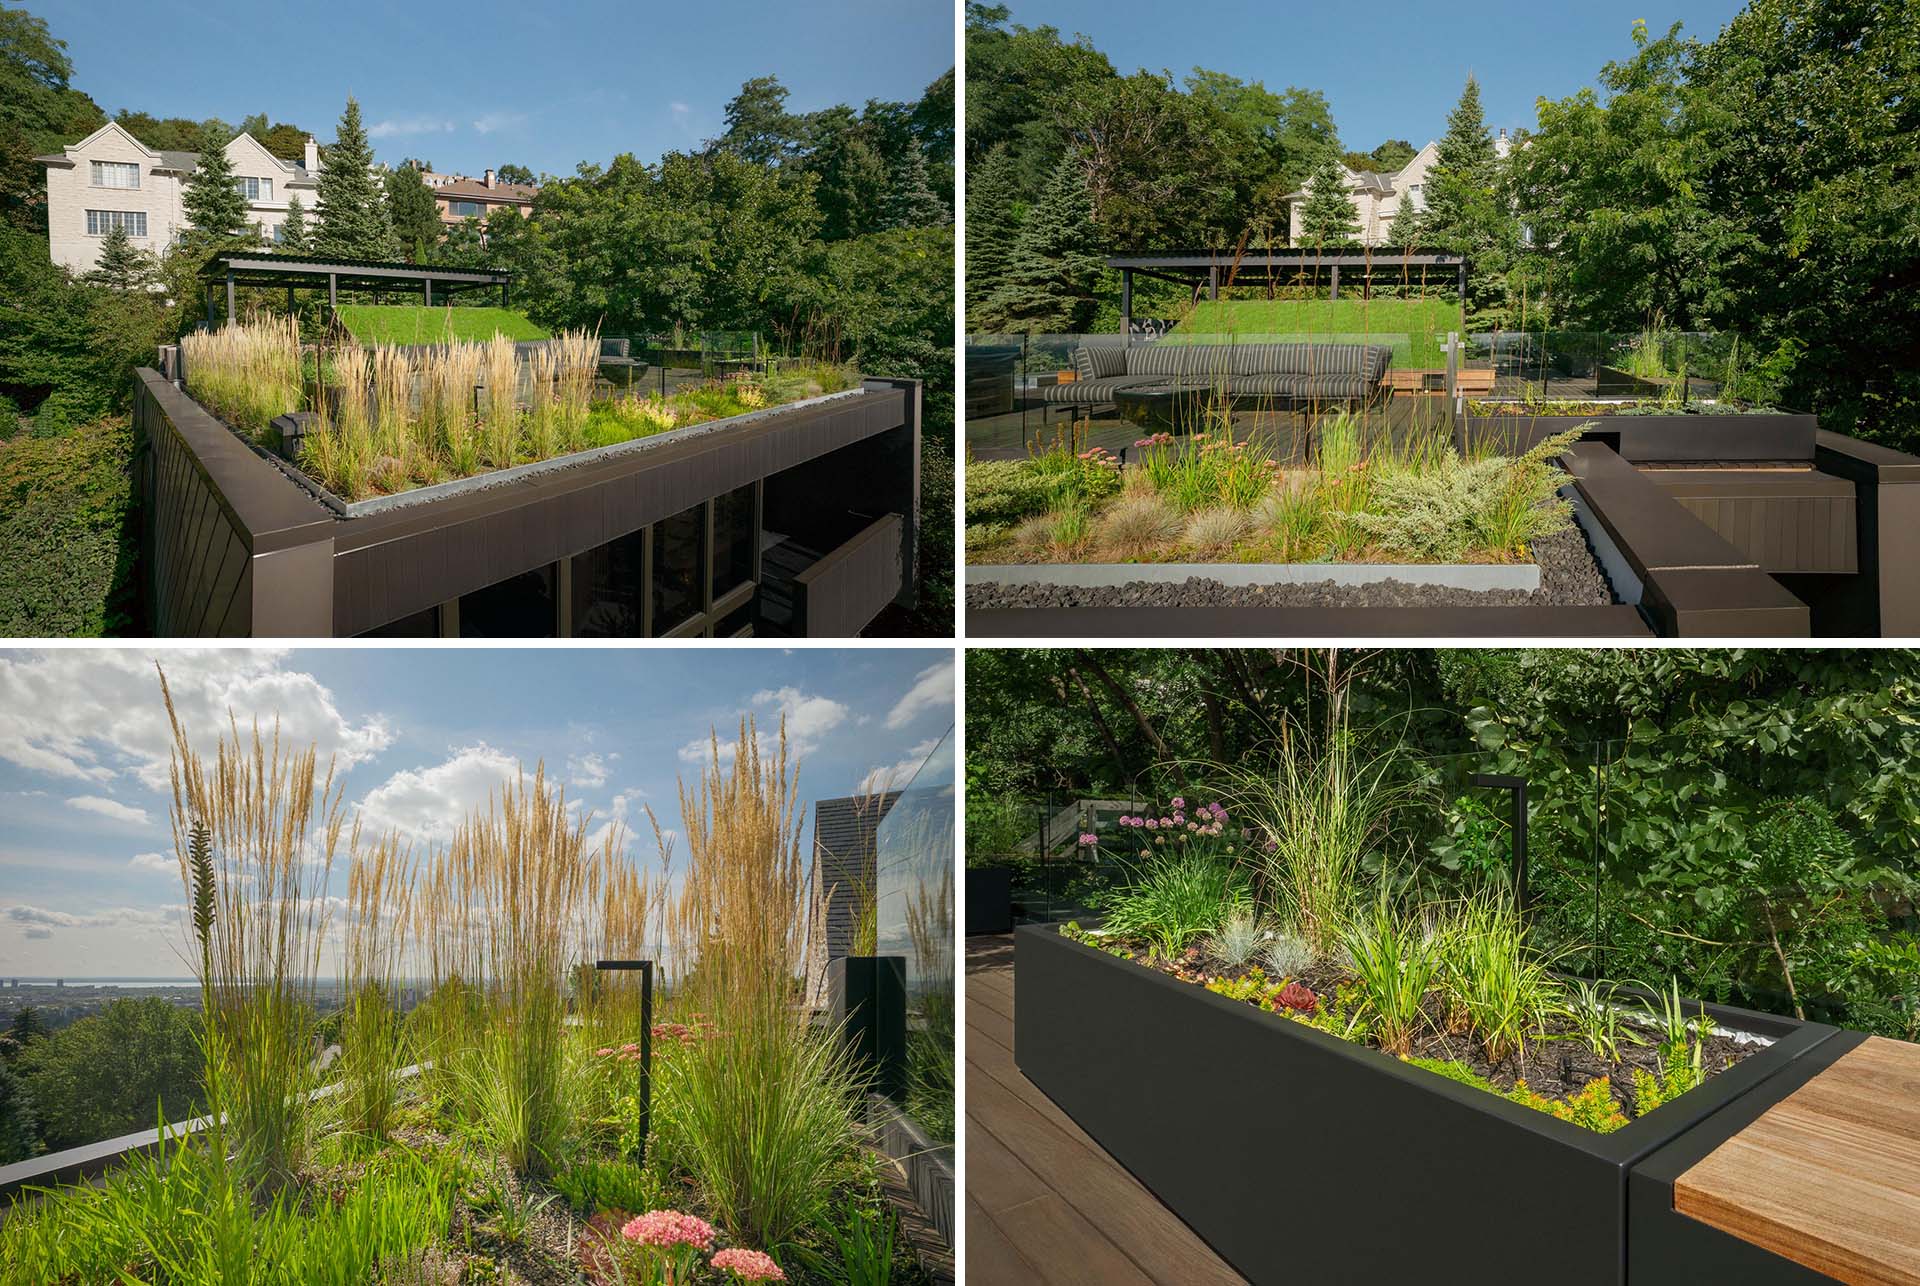 A modern rooftop terrace with an Ipe wood deck, exterior lighting, a sofa, and wildflowers.